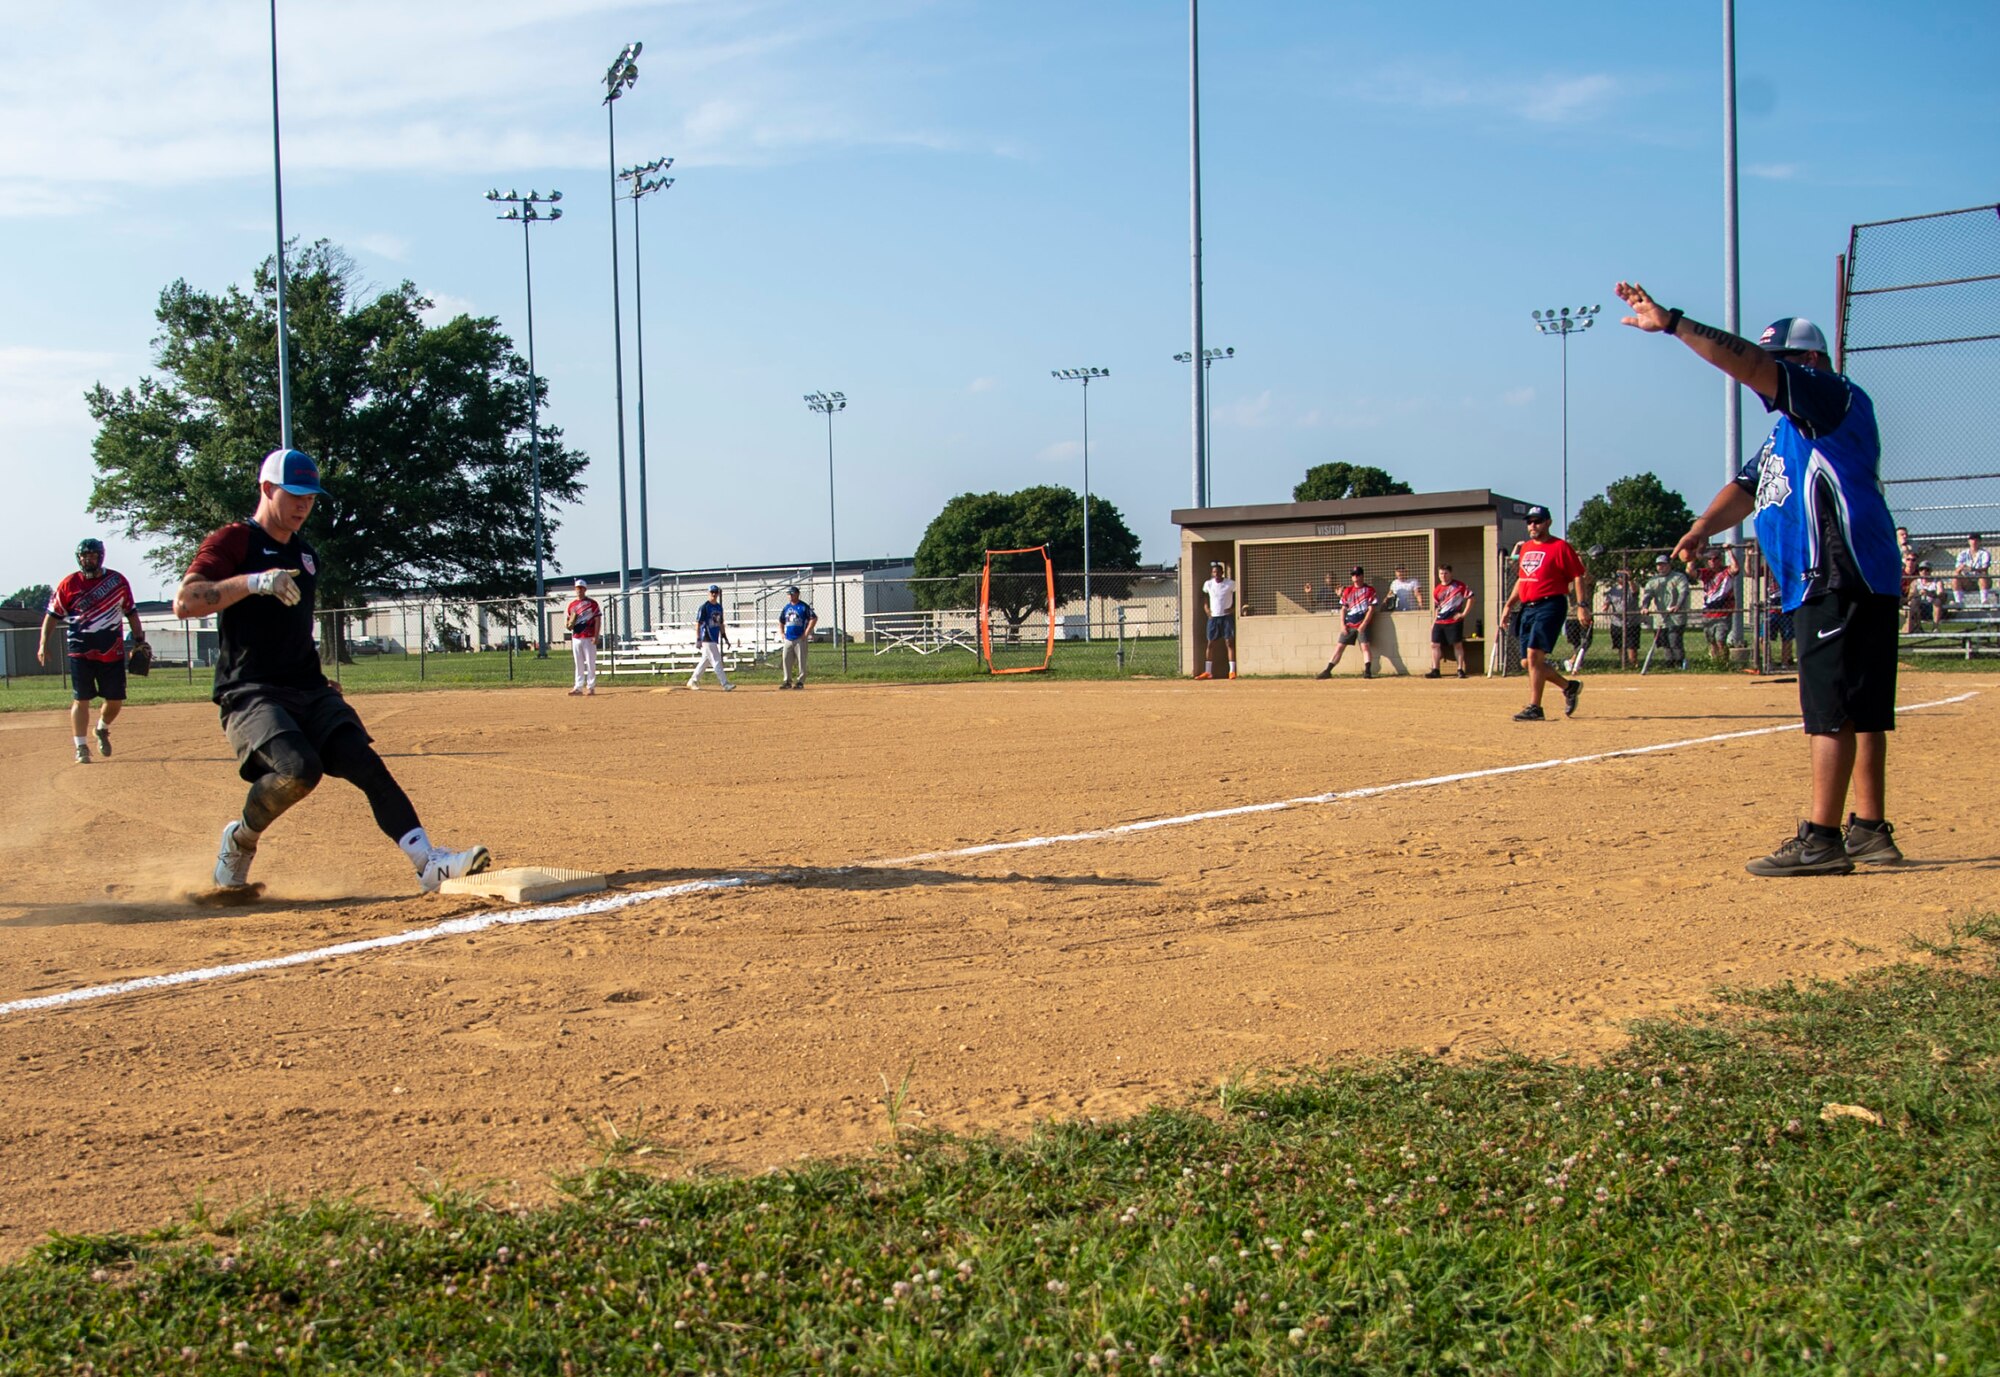 Senior Airman Noah Smith, left, 436th Security Forces Squadron response force member, reaches third base as Rafael Gonzalez, 436th SFS detective, coaches during an intramural softball game on Dover Air Force Base, Delaware, July 26, 2021. The 436th SFS won the game 13-4. (U.S. Air Force photo by Tech. Sgt. Nicole Leidholm)